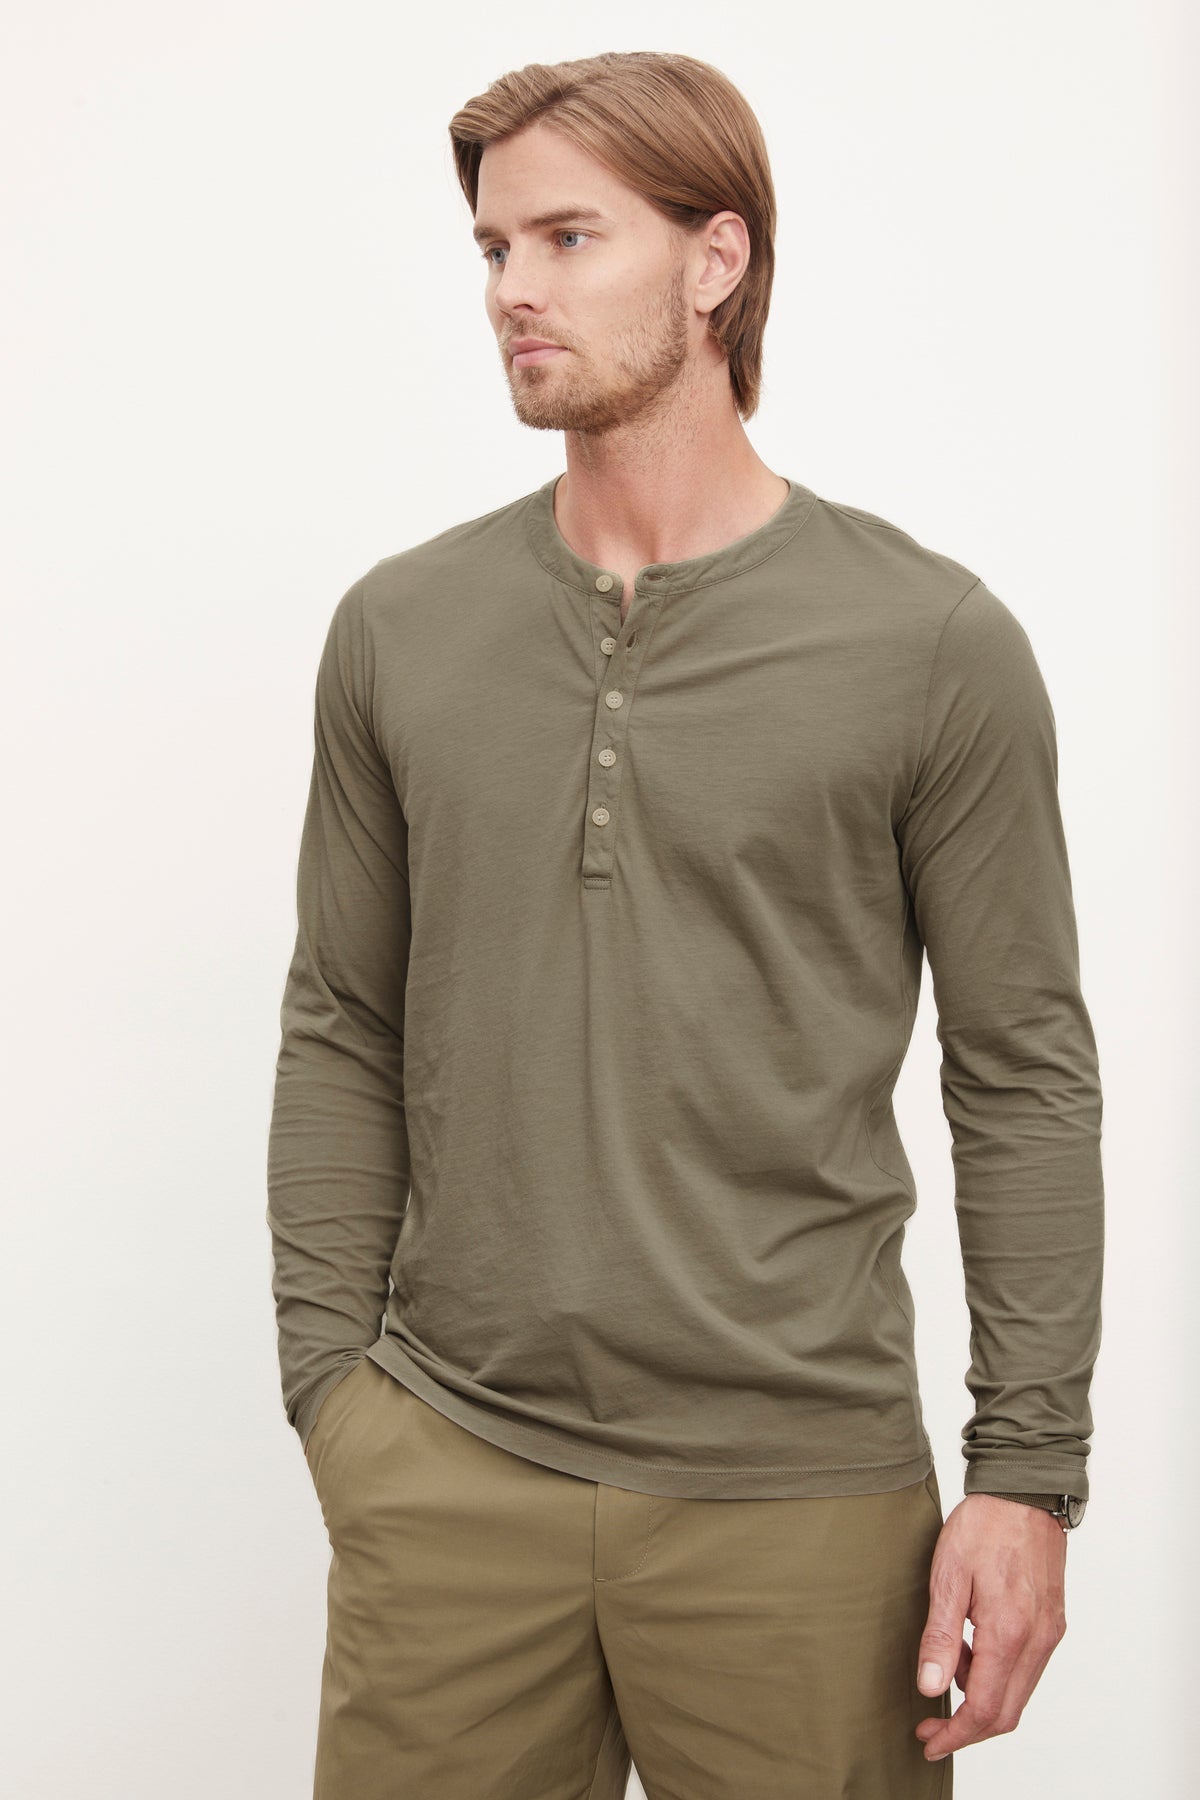 A man wearing a Velvet by Graham & Spencer ALVARO COTTON JERSEY HENLEY shirt paired with matching whisper knit pants, standing against a plain background.-36009056403649